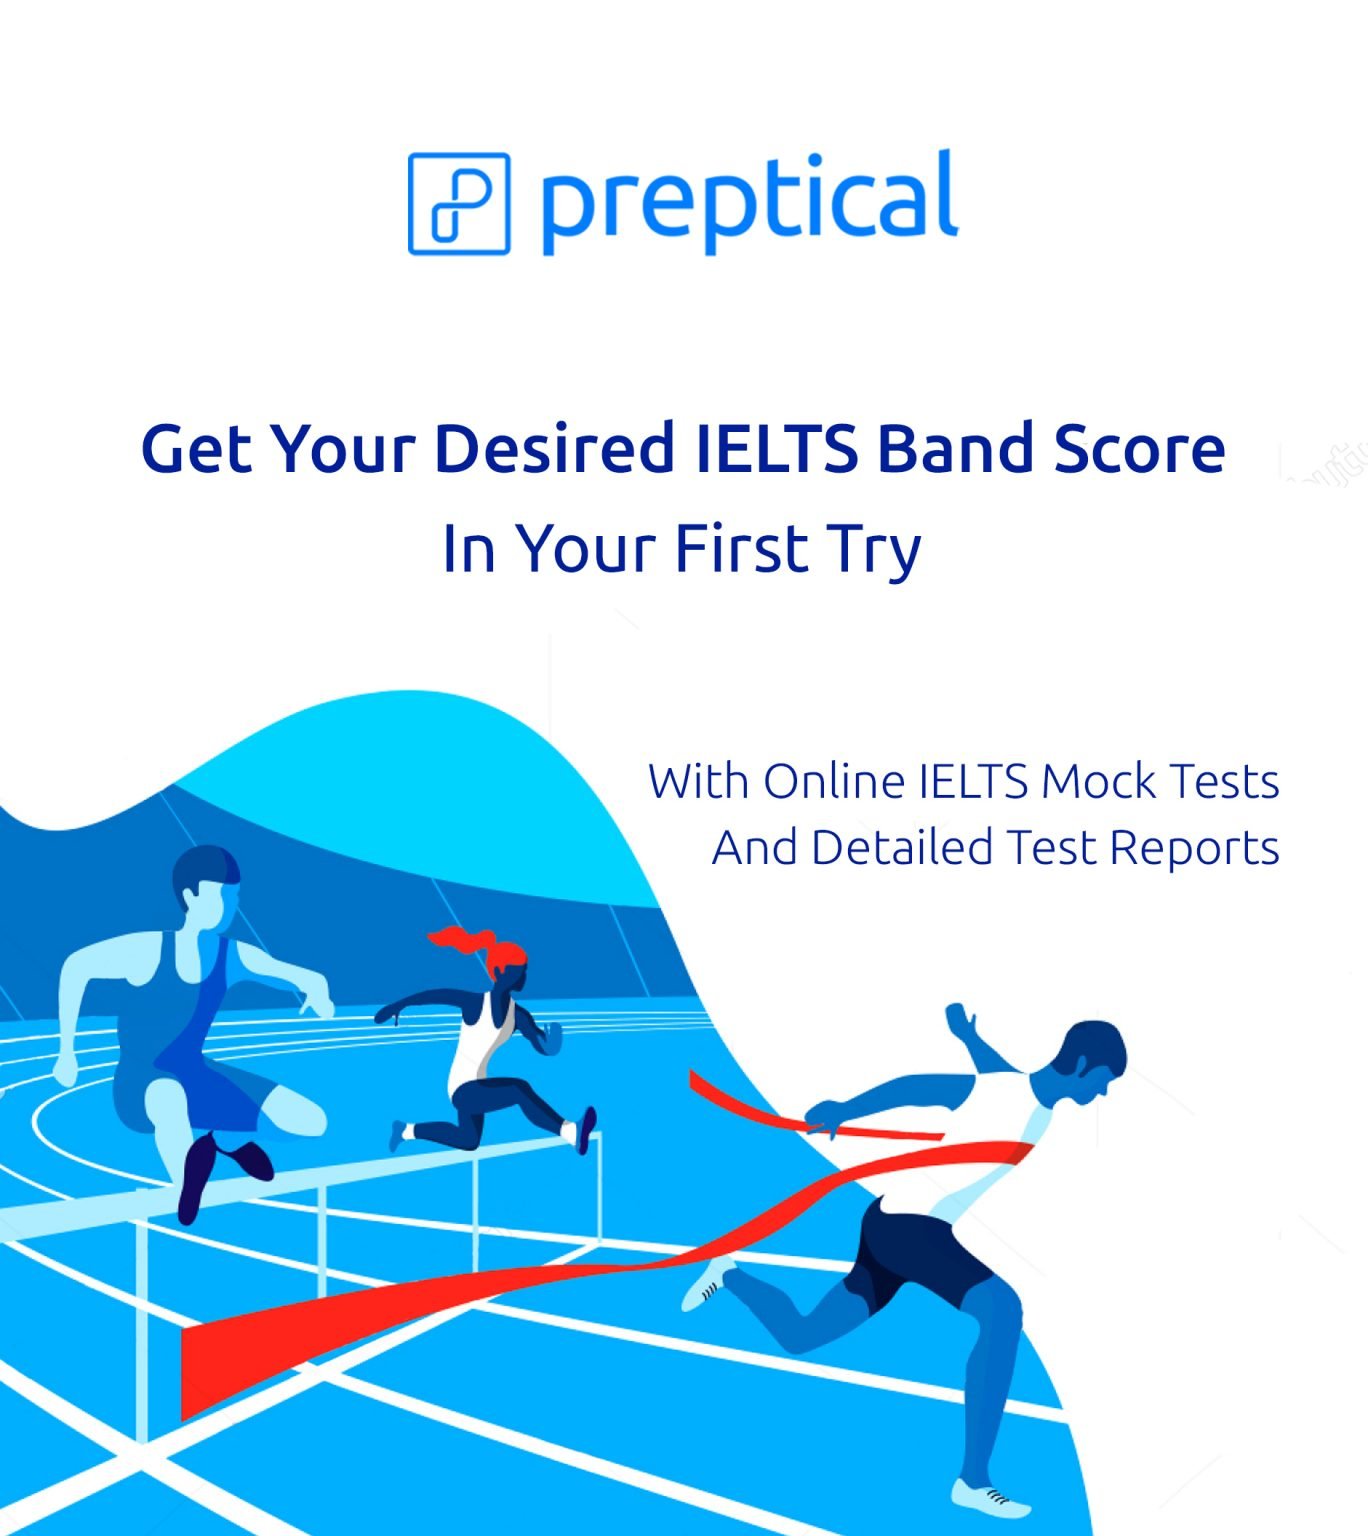 With Preptical, make preparation for the IELTS and many other language exams easy, affordable and borderless.